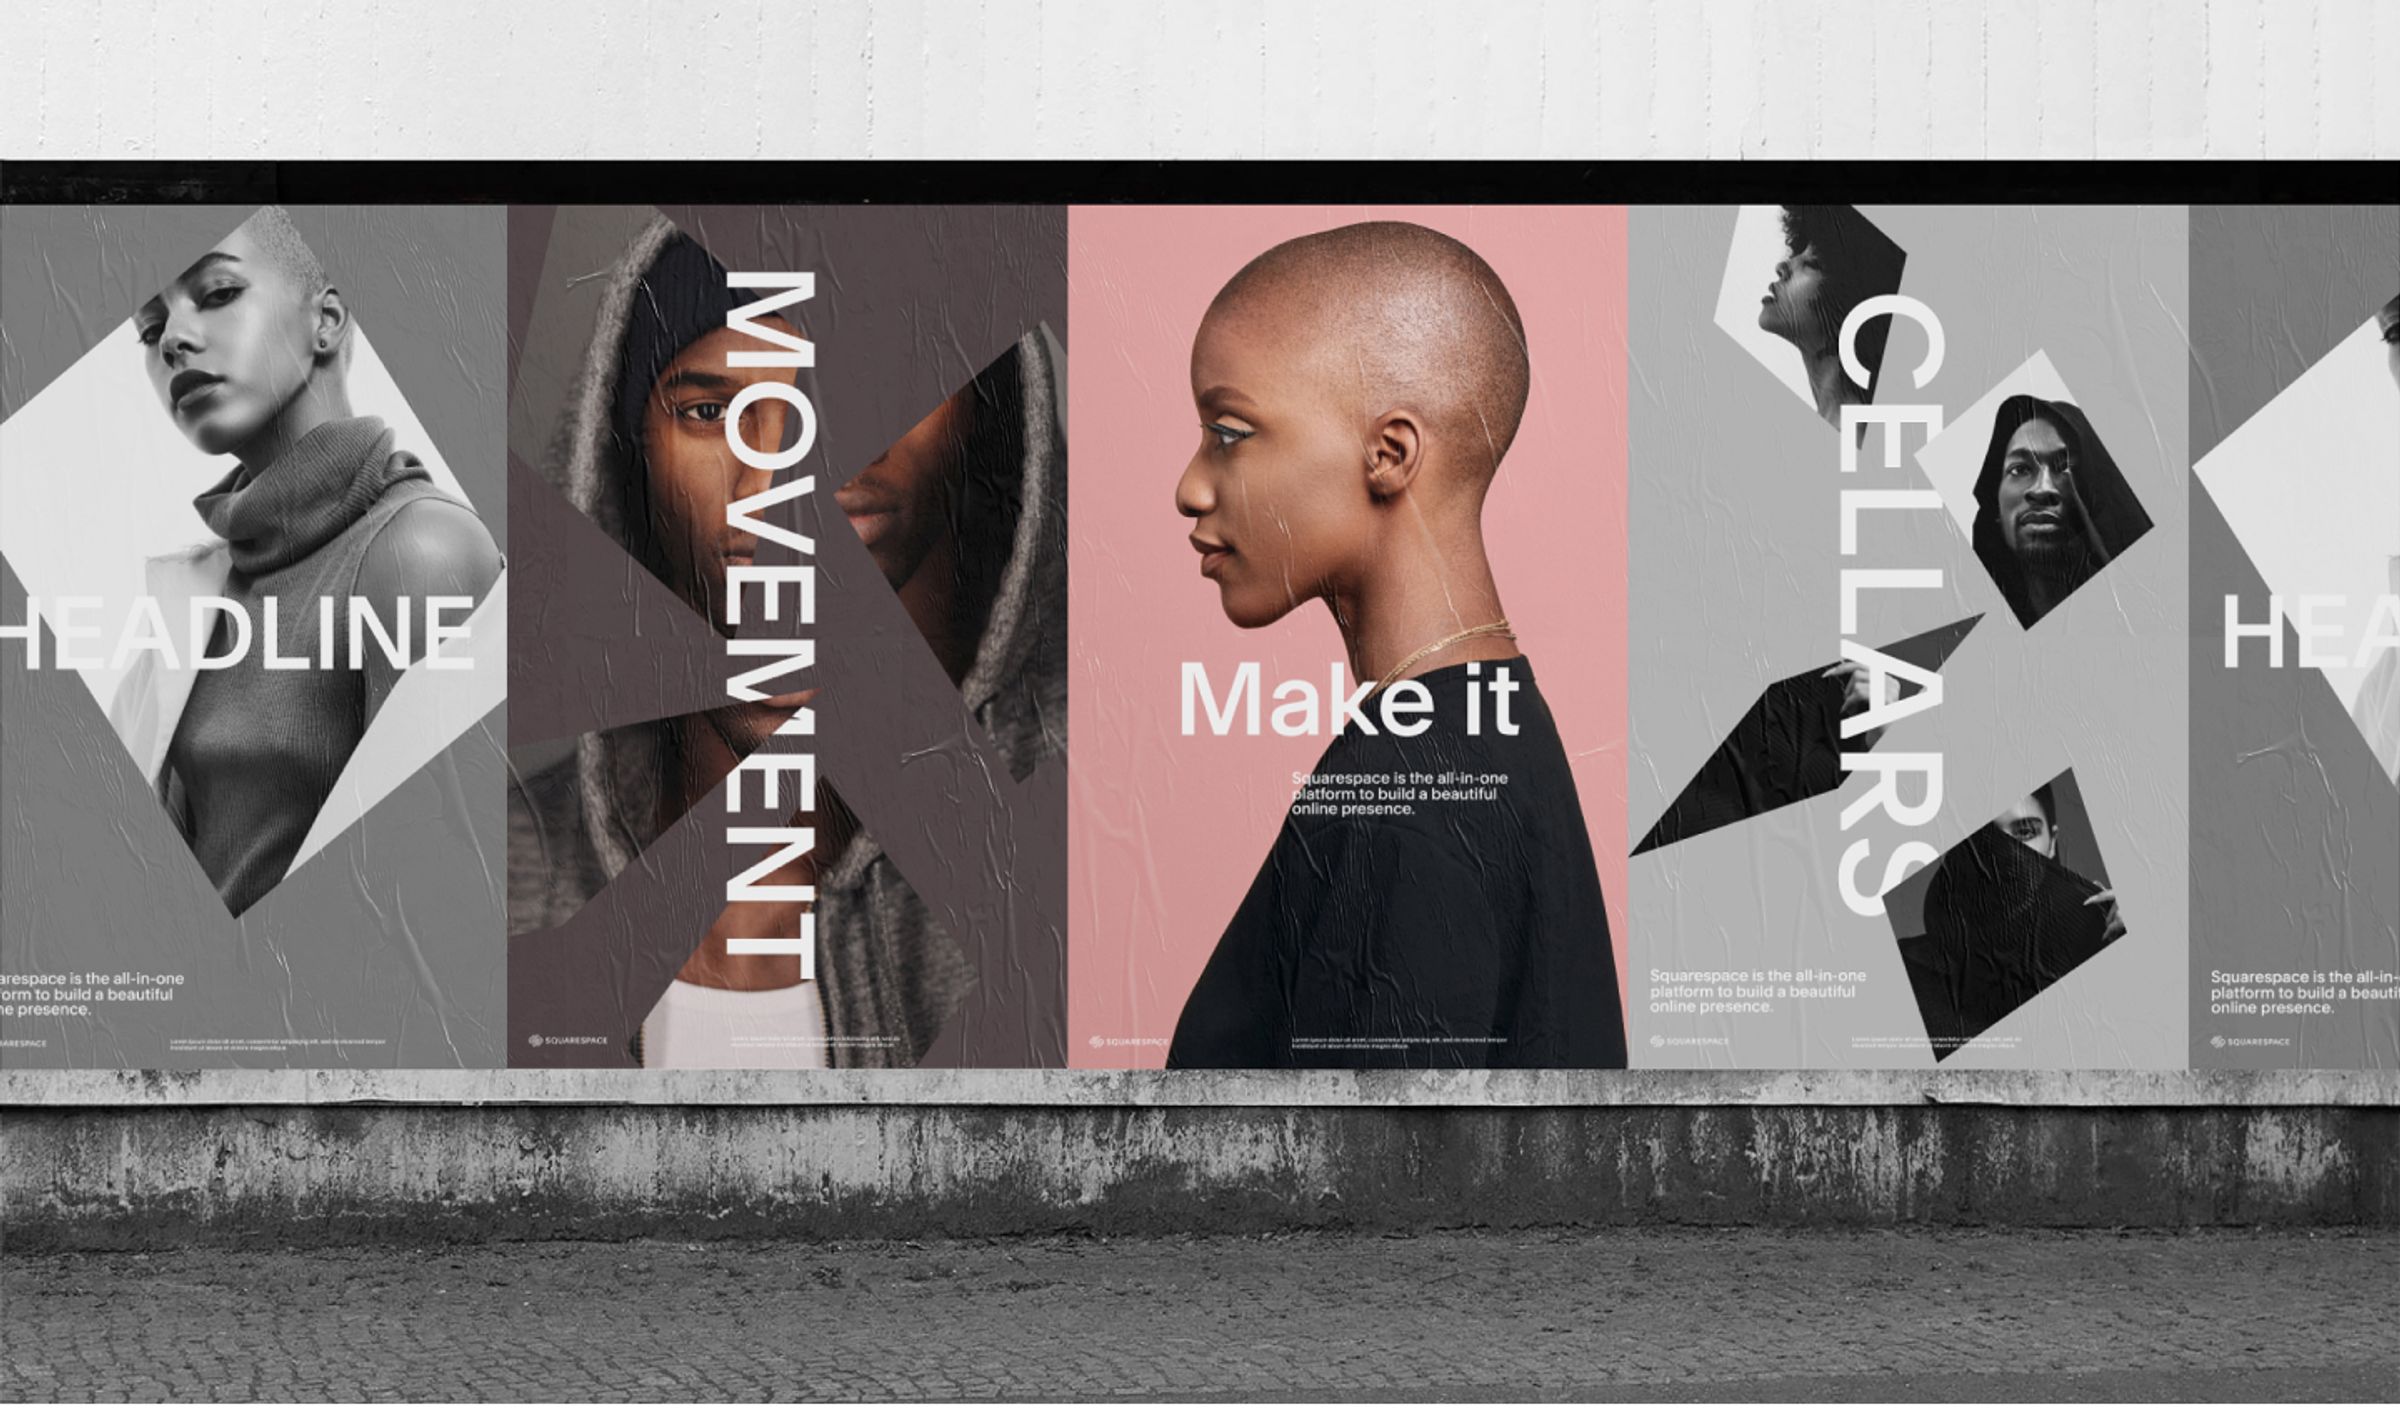 Squarespace branding used in posters on the side of a concrete wall